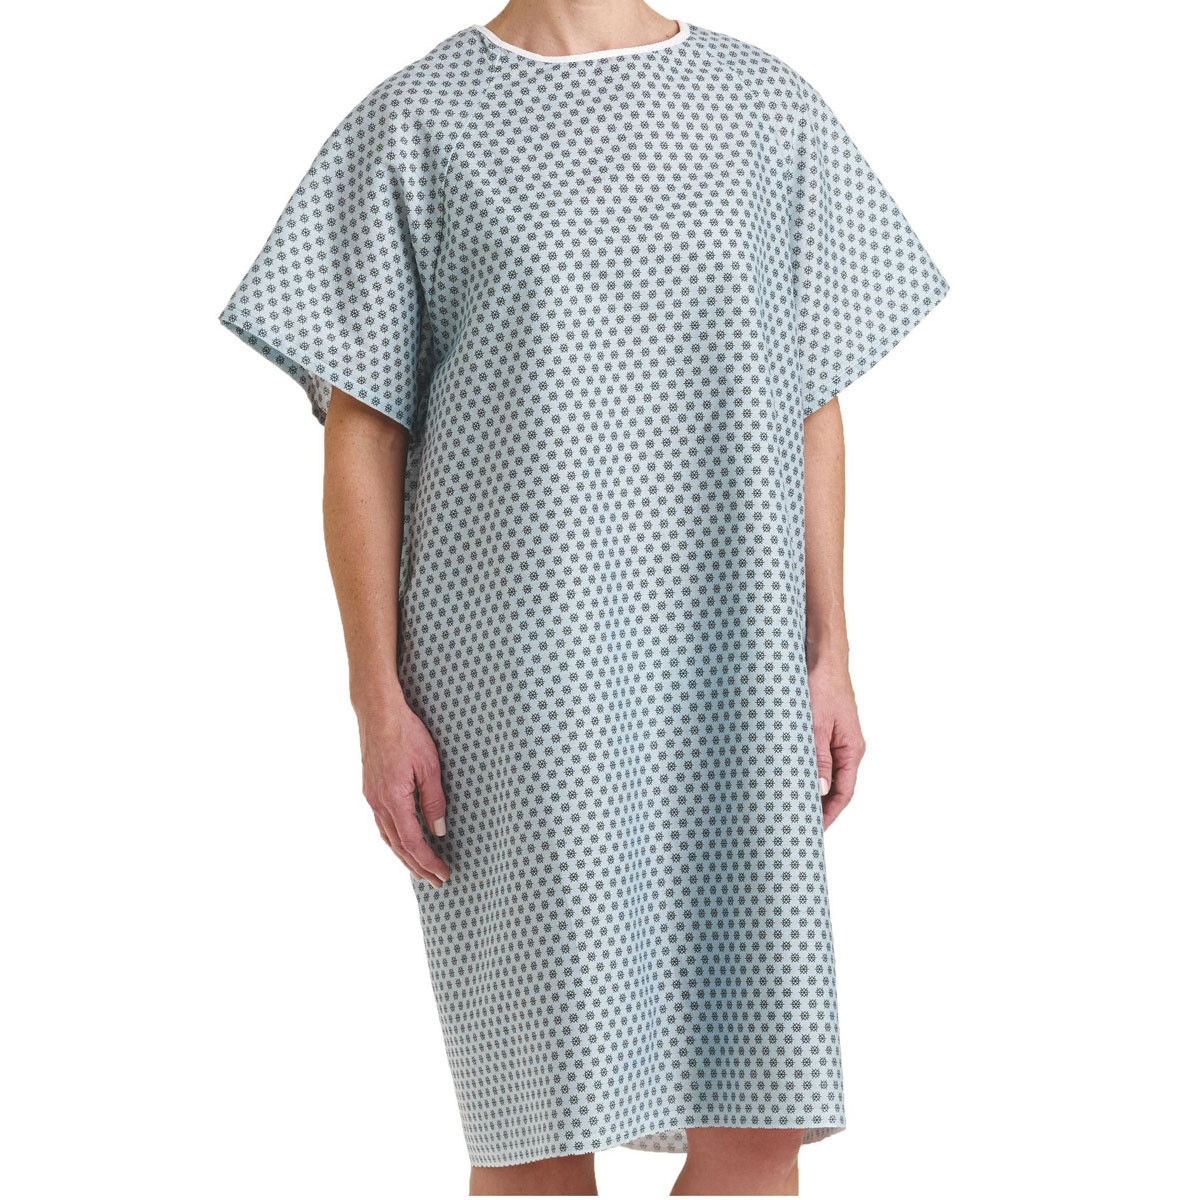 What is the color and pattern of this hospital gown?